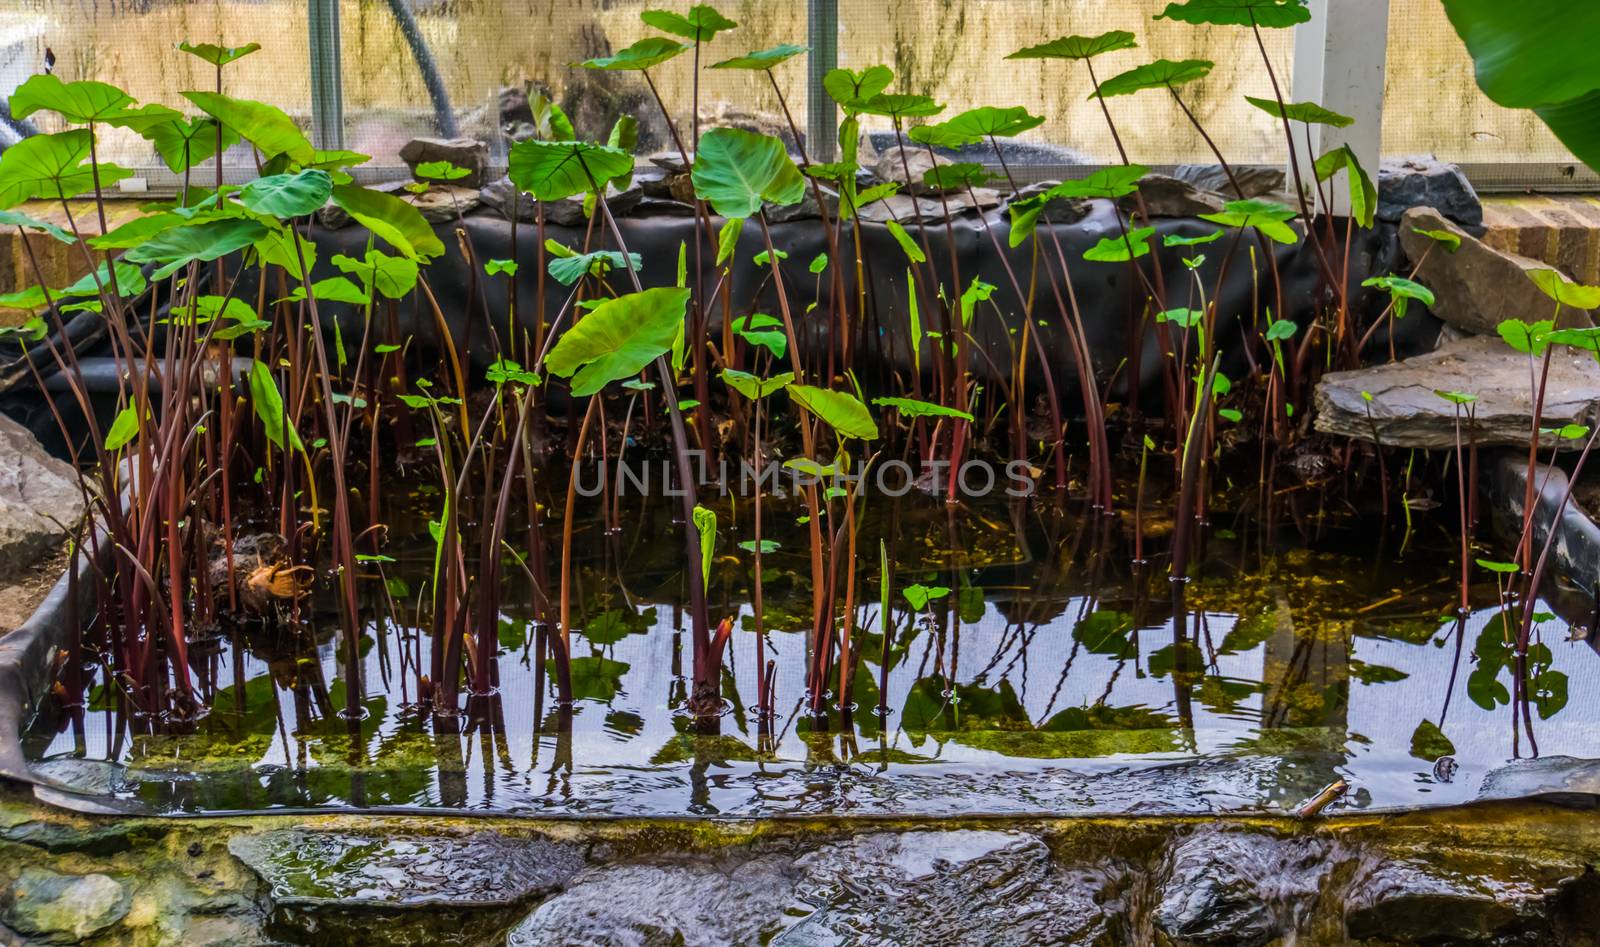 Taro plants growingin water, Cultivation of tropical plants and vegetables, agriculture background by charlottebleijenberg